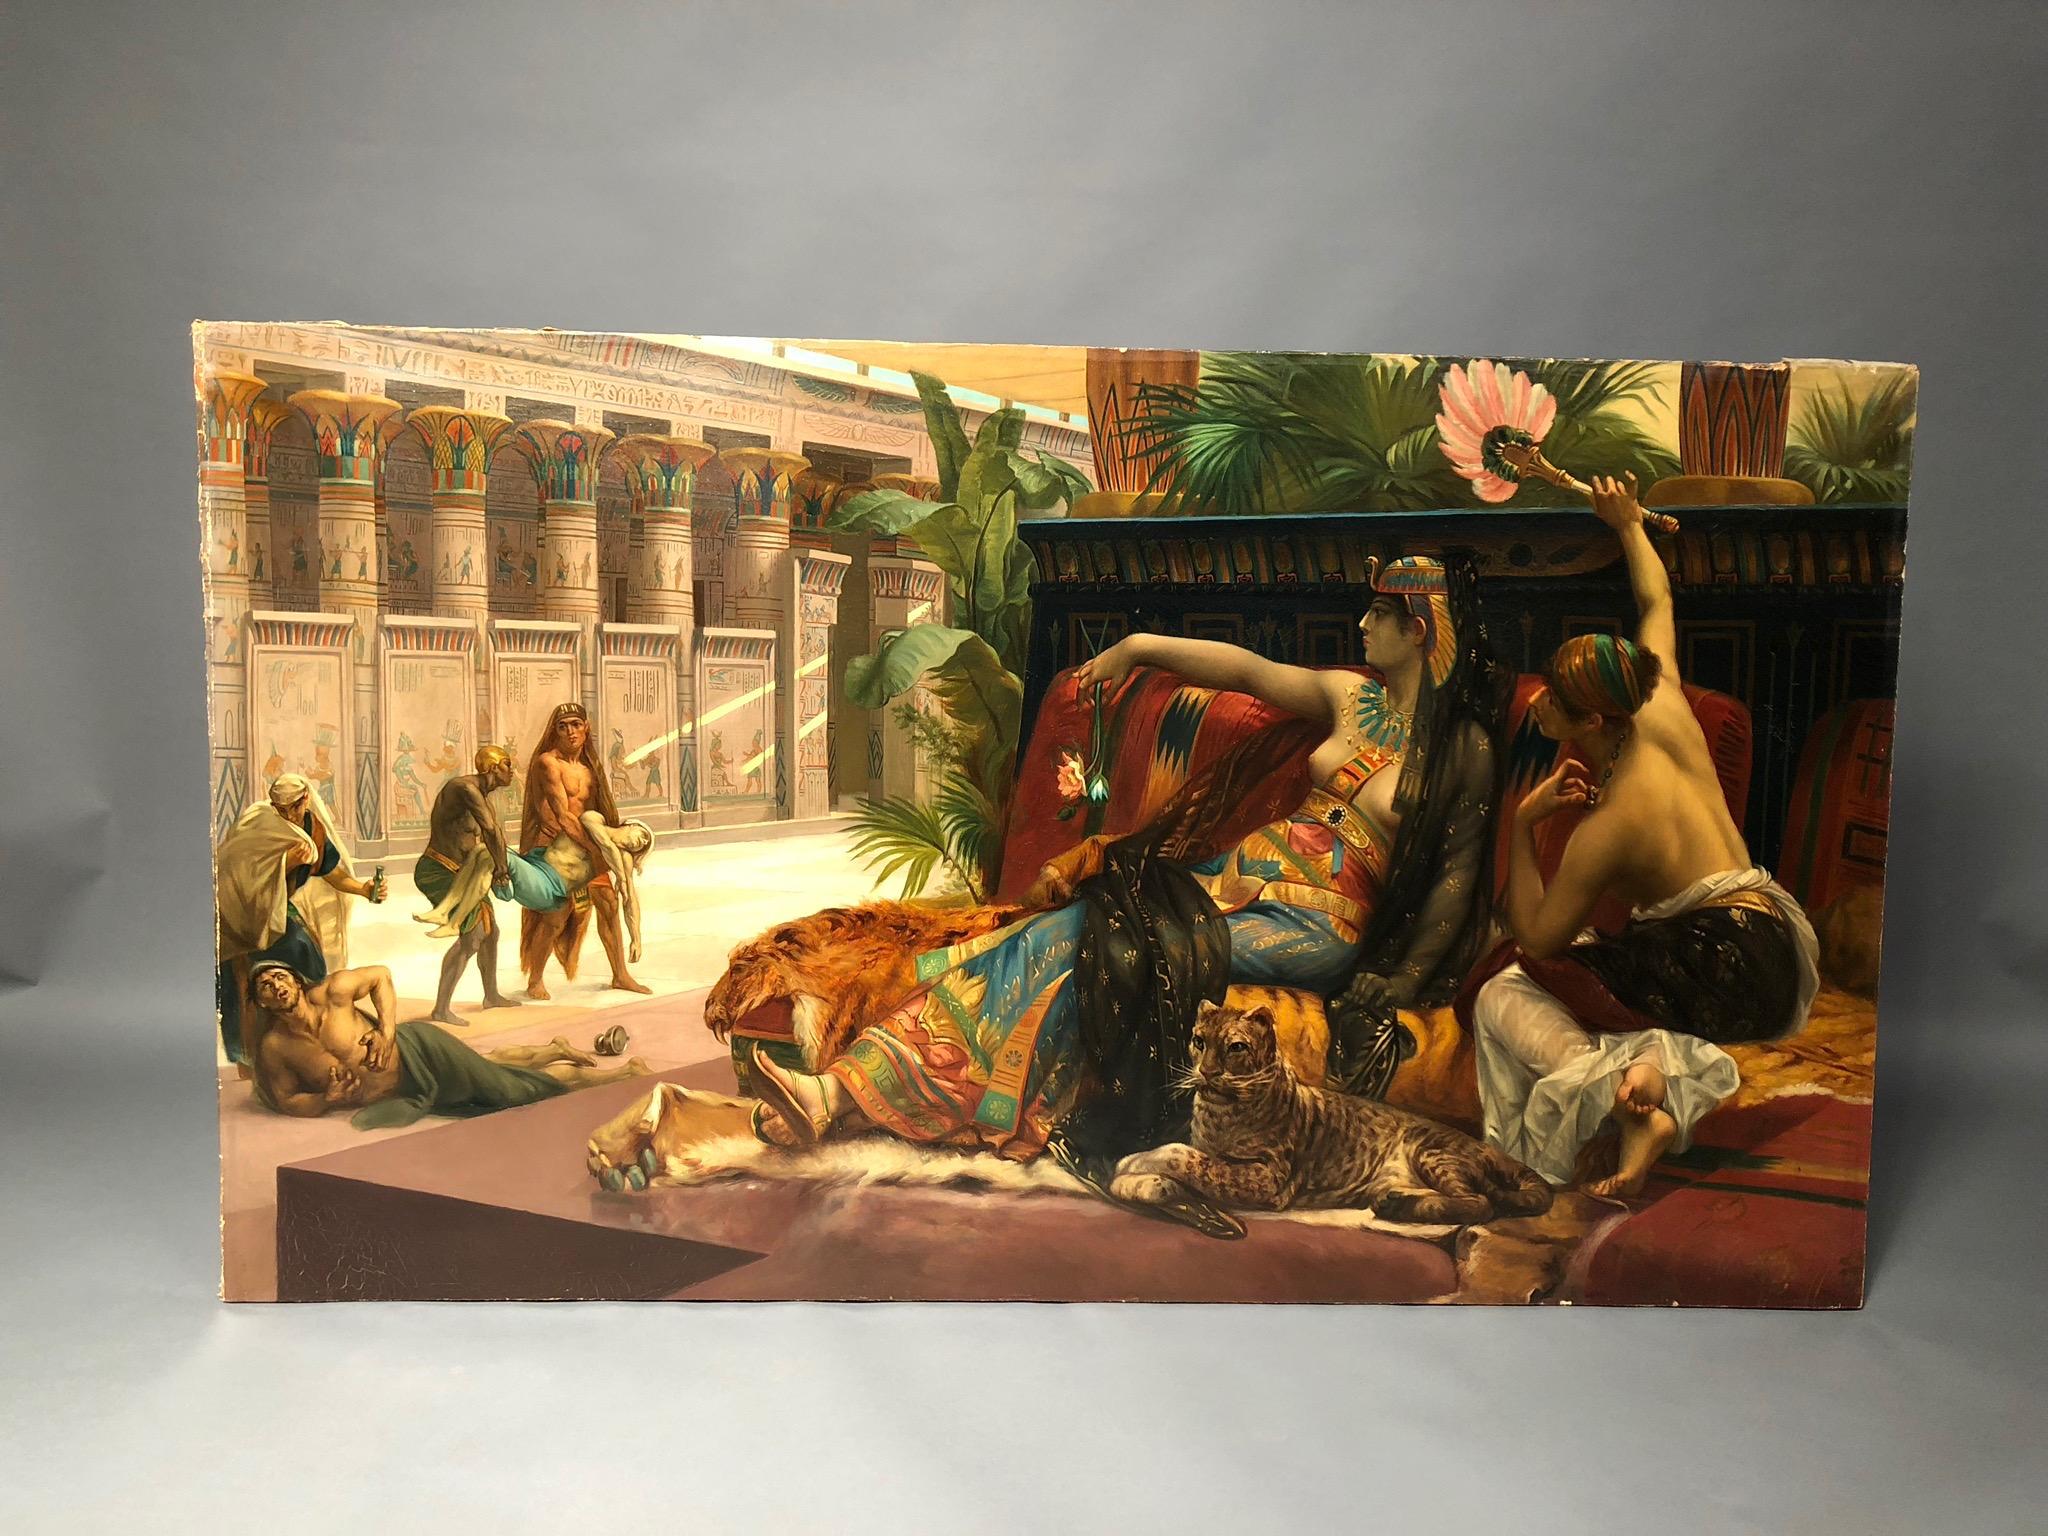 Cleopatra Testing Poison on Condemned Prisoners - Painting by Alexandre Cabanel